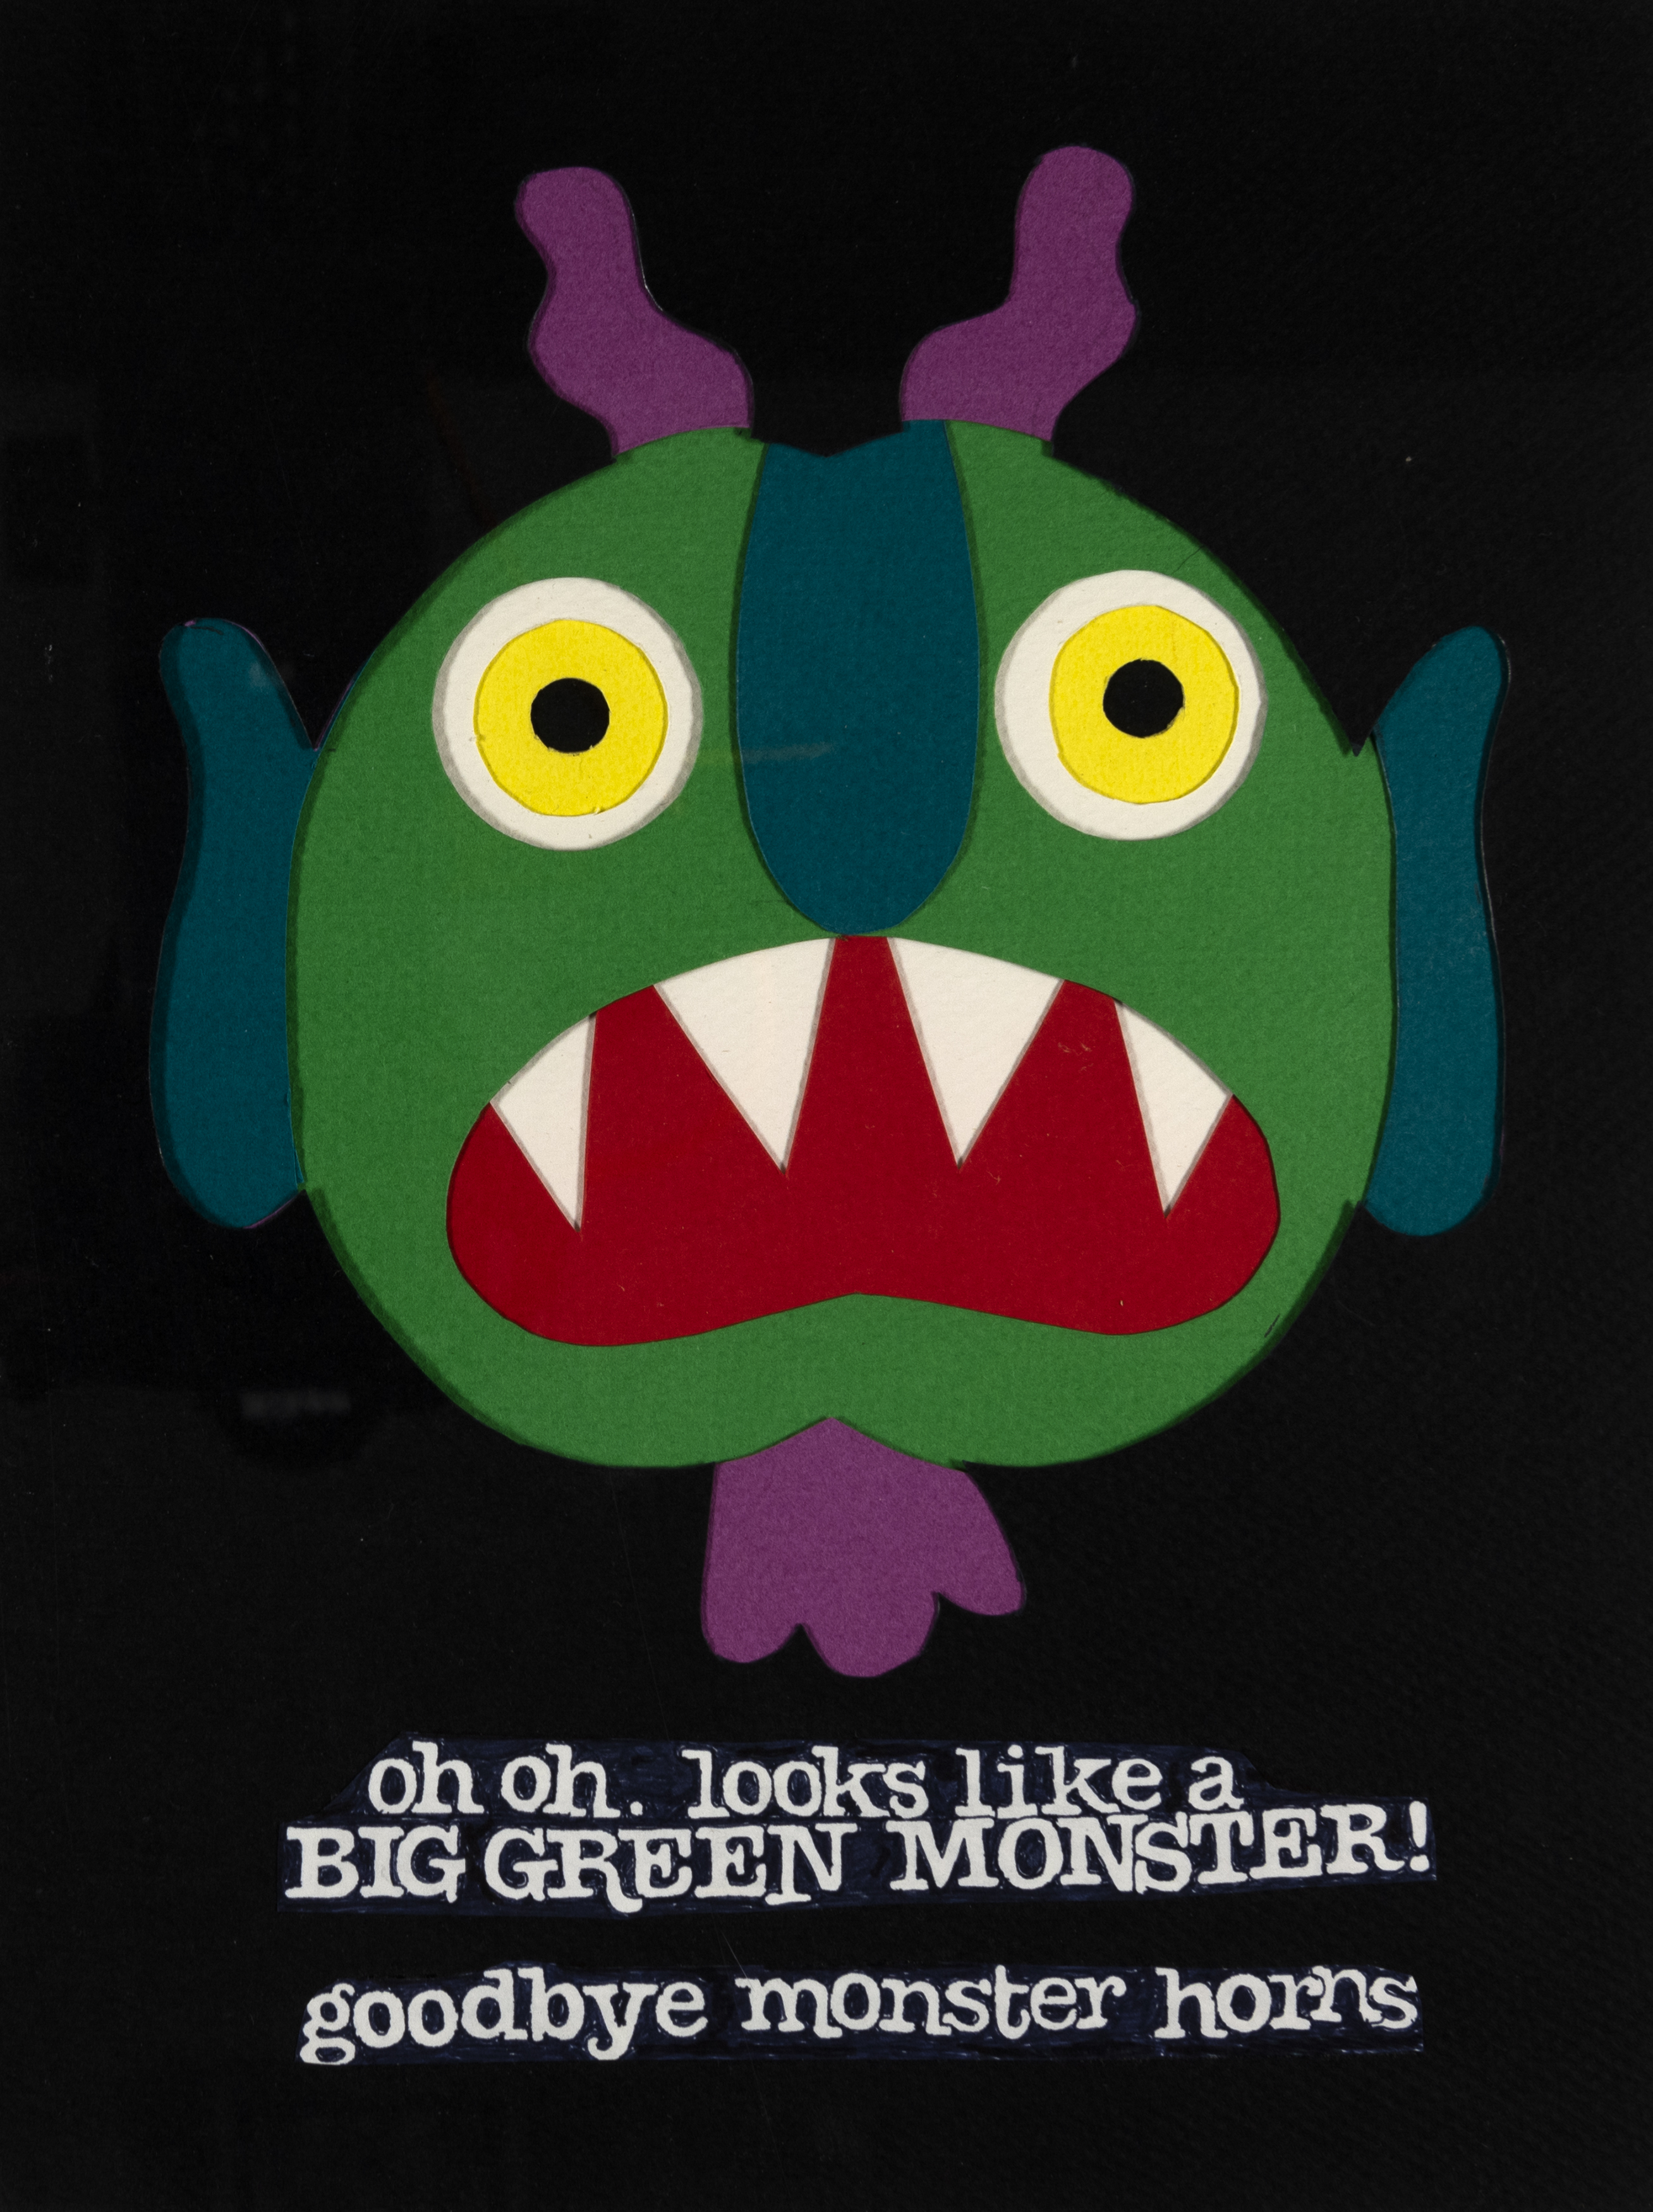 Cover for Big Green Monster with monster head. 